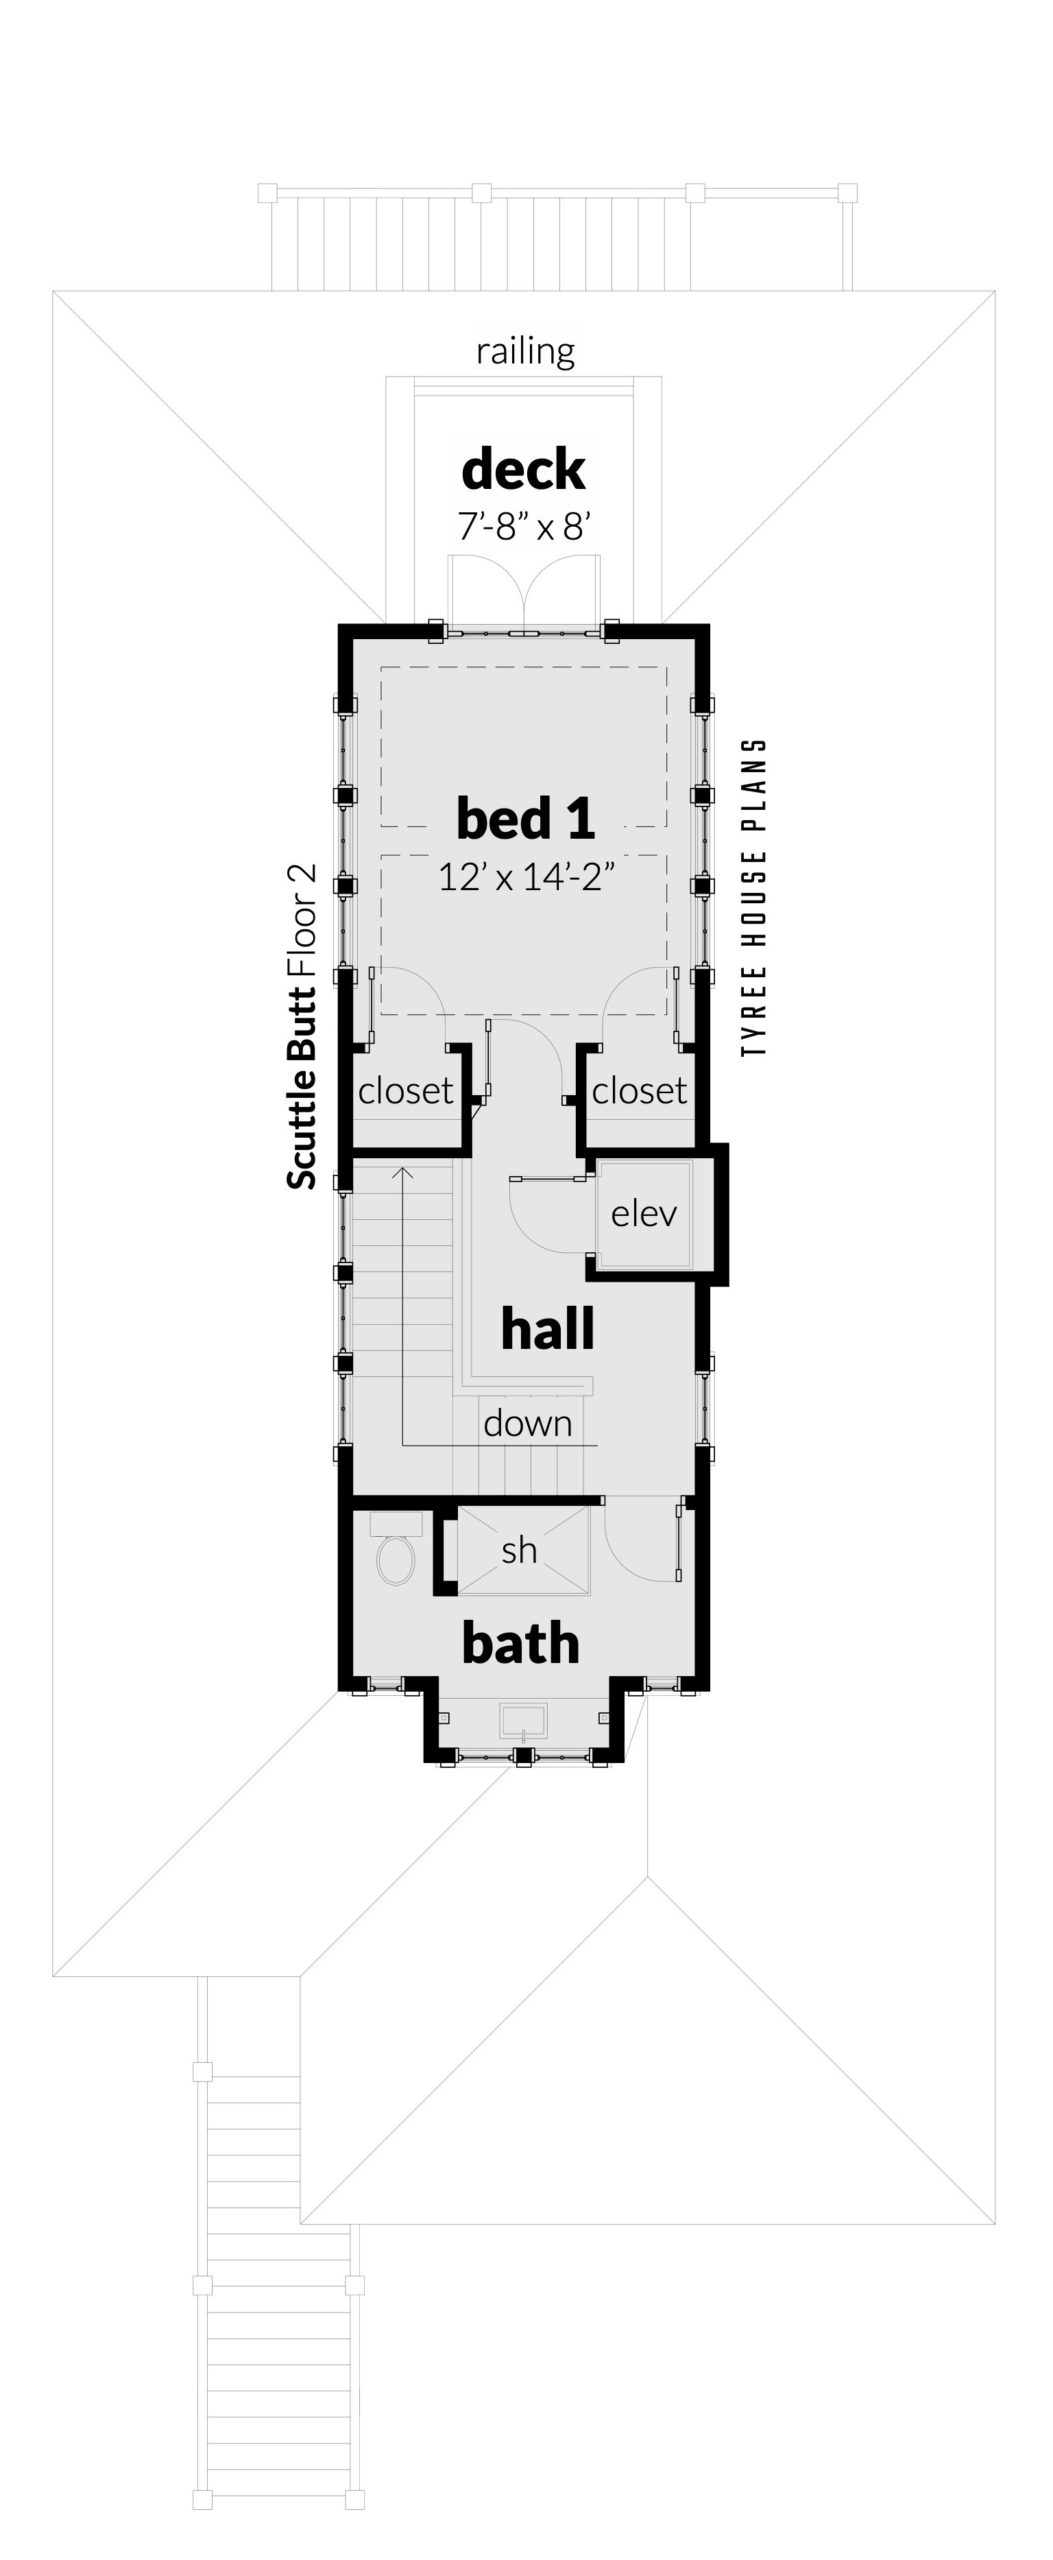 Floor 3 - Scuttle Butt by Tyree House Plans.